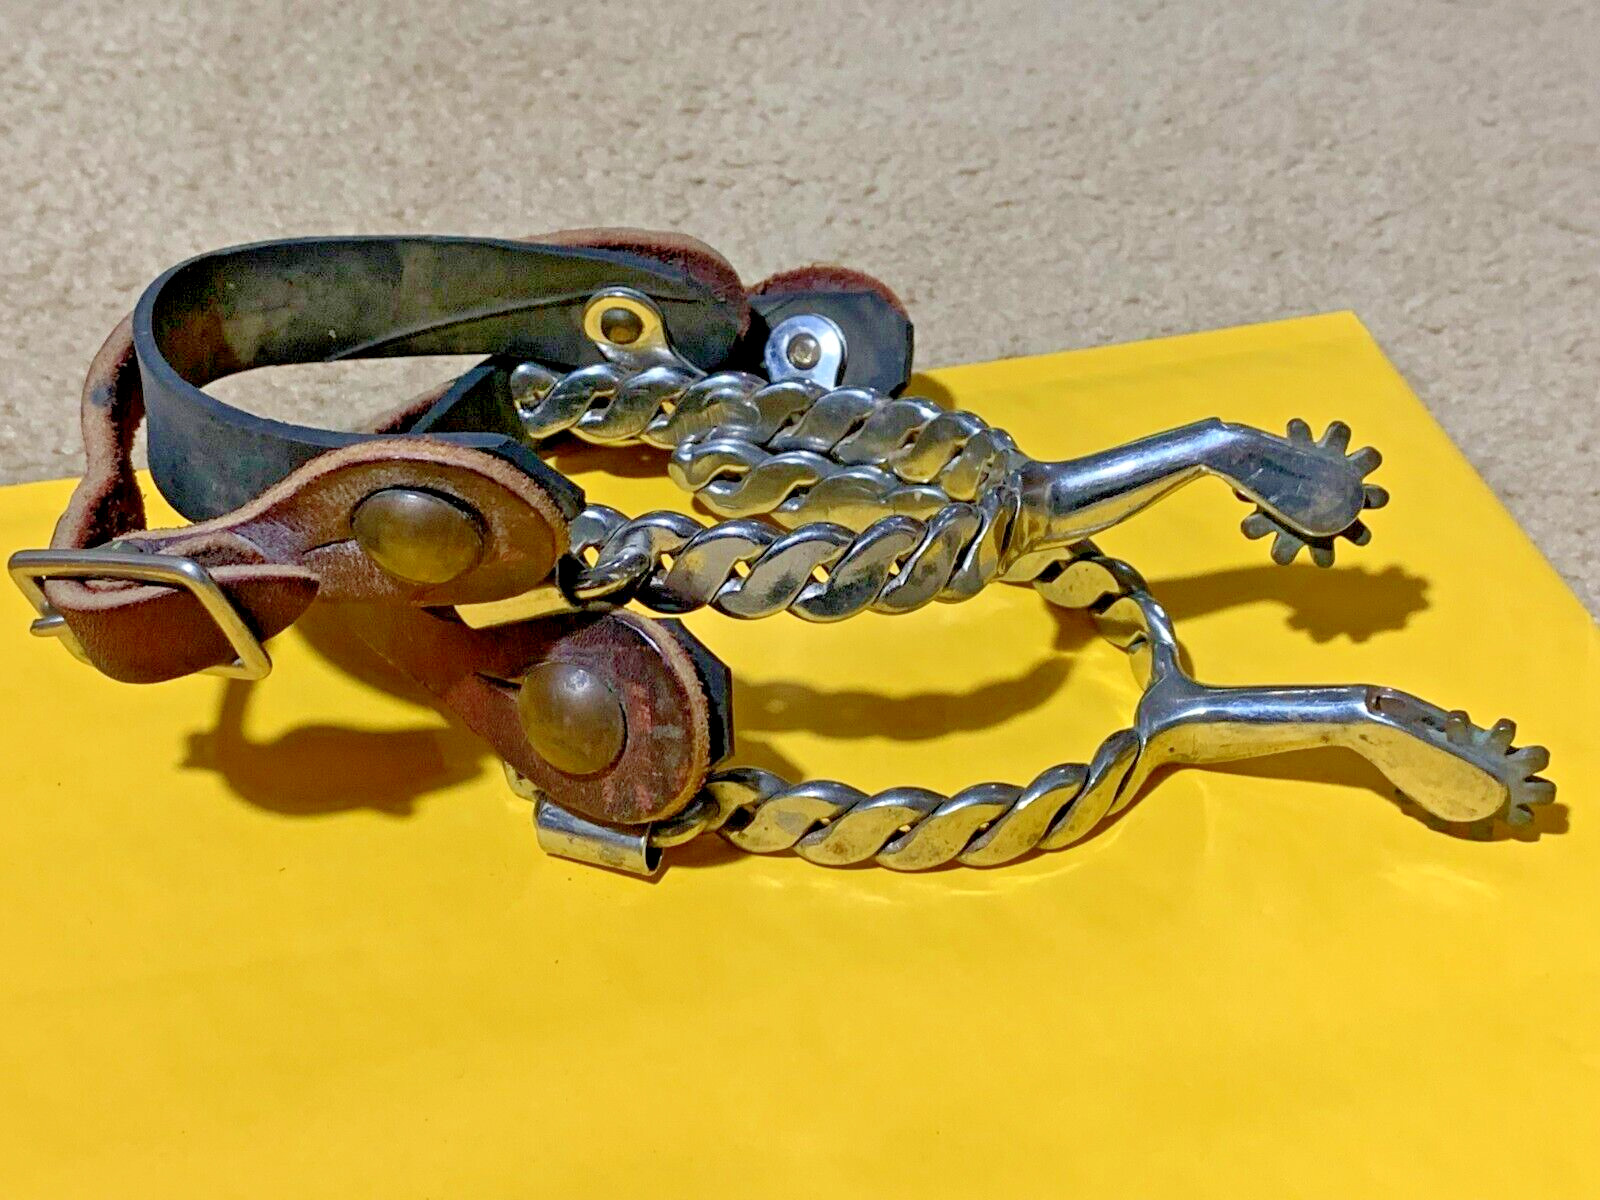 Vintage Twisted Spurs with leather straps